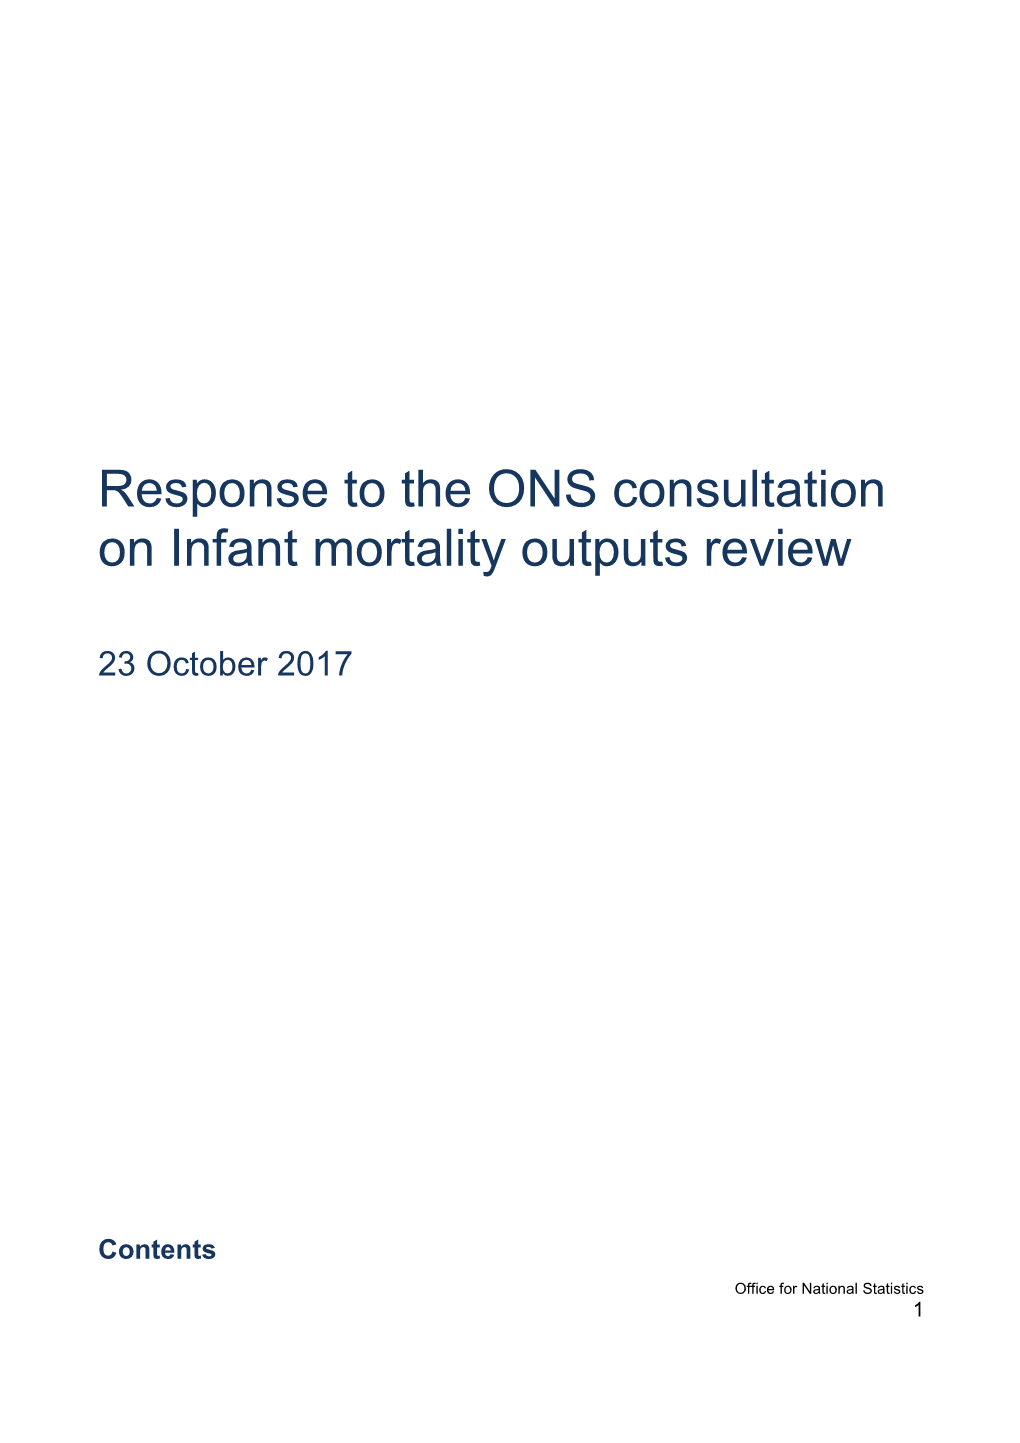 Response to the ONS Consultation on Infant Mortality Outputs Review